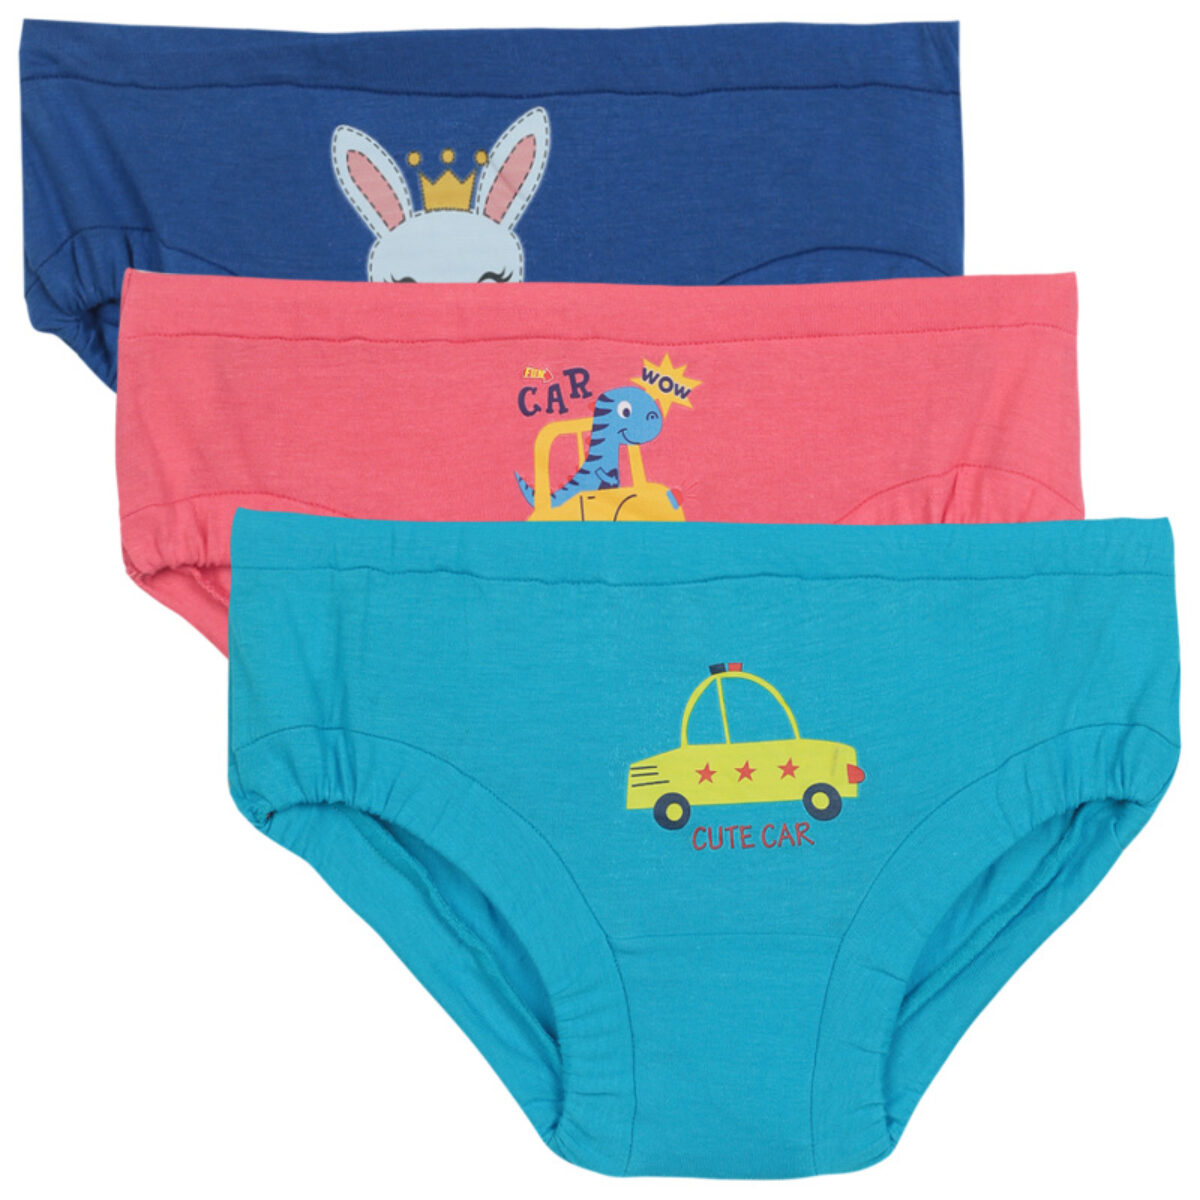 Baby and Beyond  Enfant Baby Underwear Panty/Brief ED361060SX – Blue 0-3mos